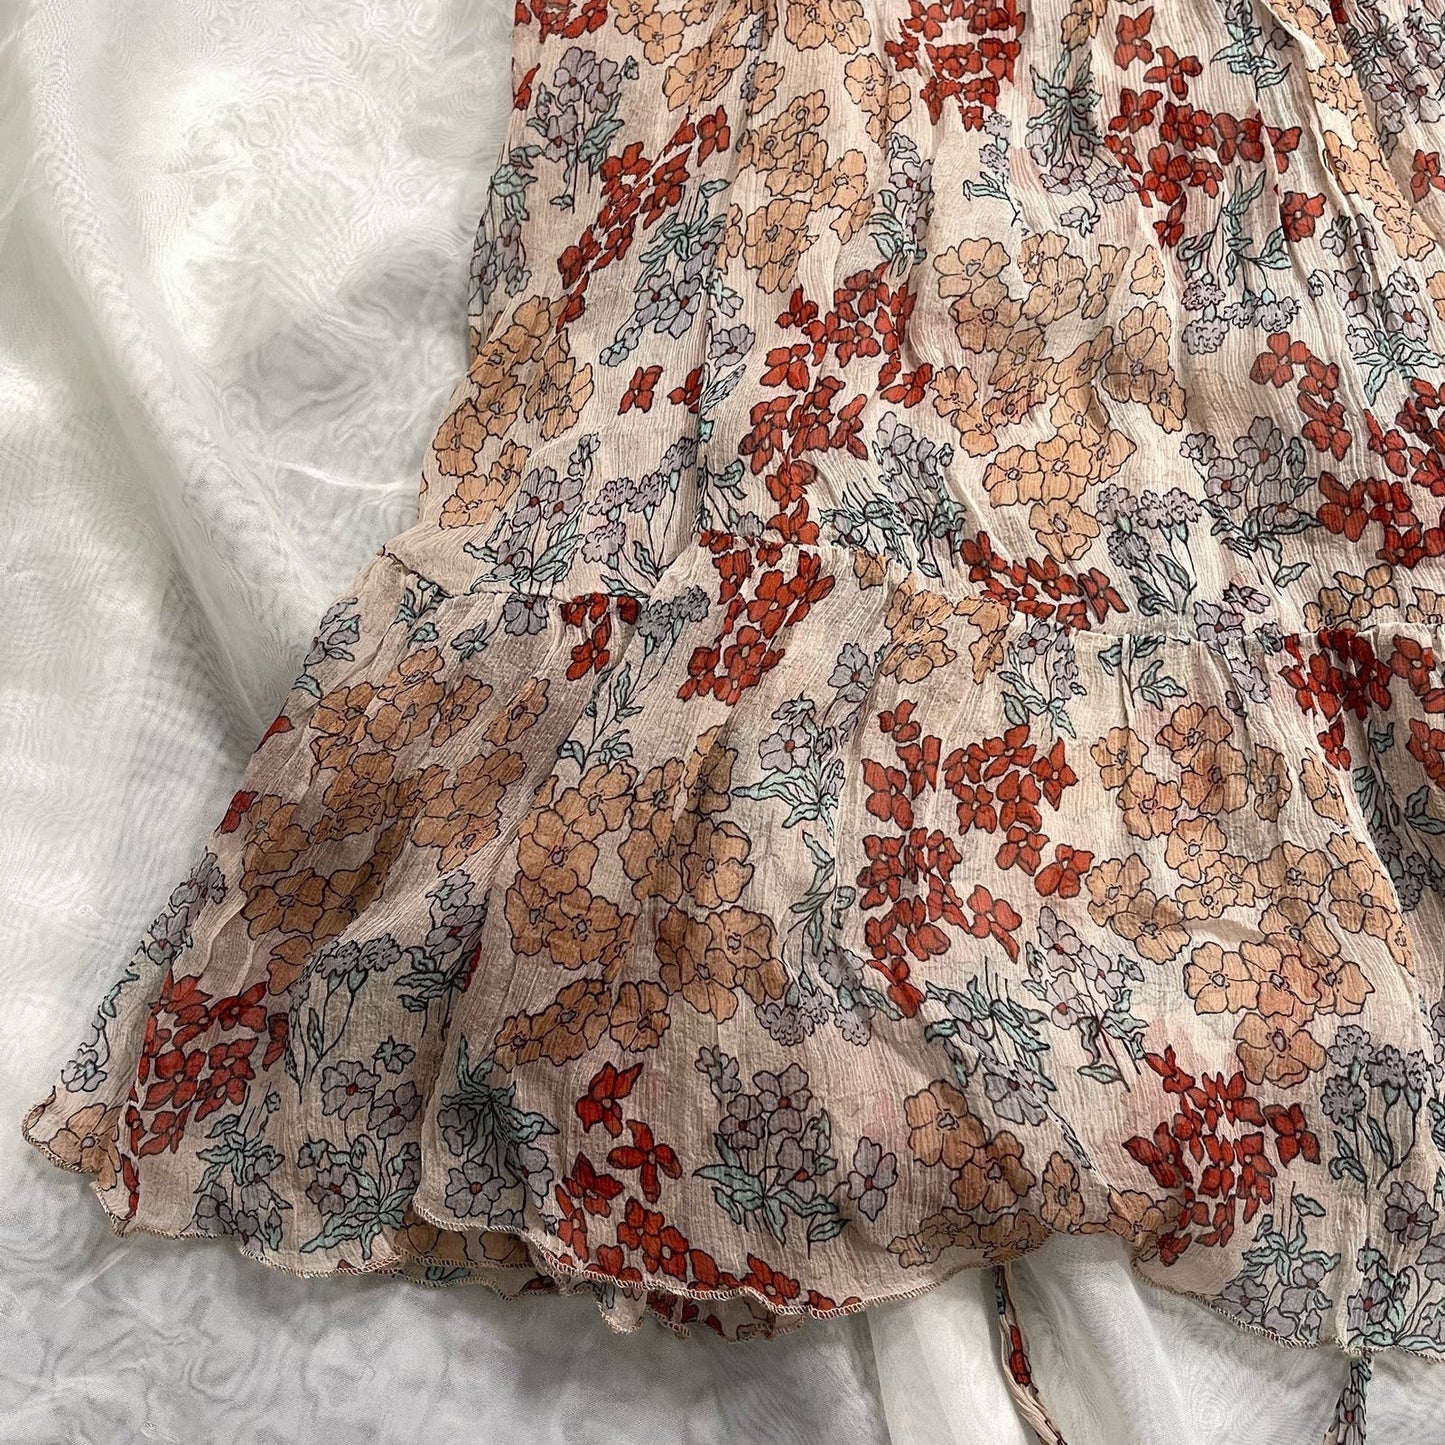 Made in Italy - 100% Silk Vintage Floral dress (S-M)